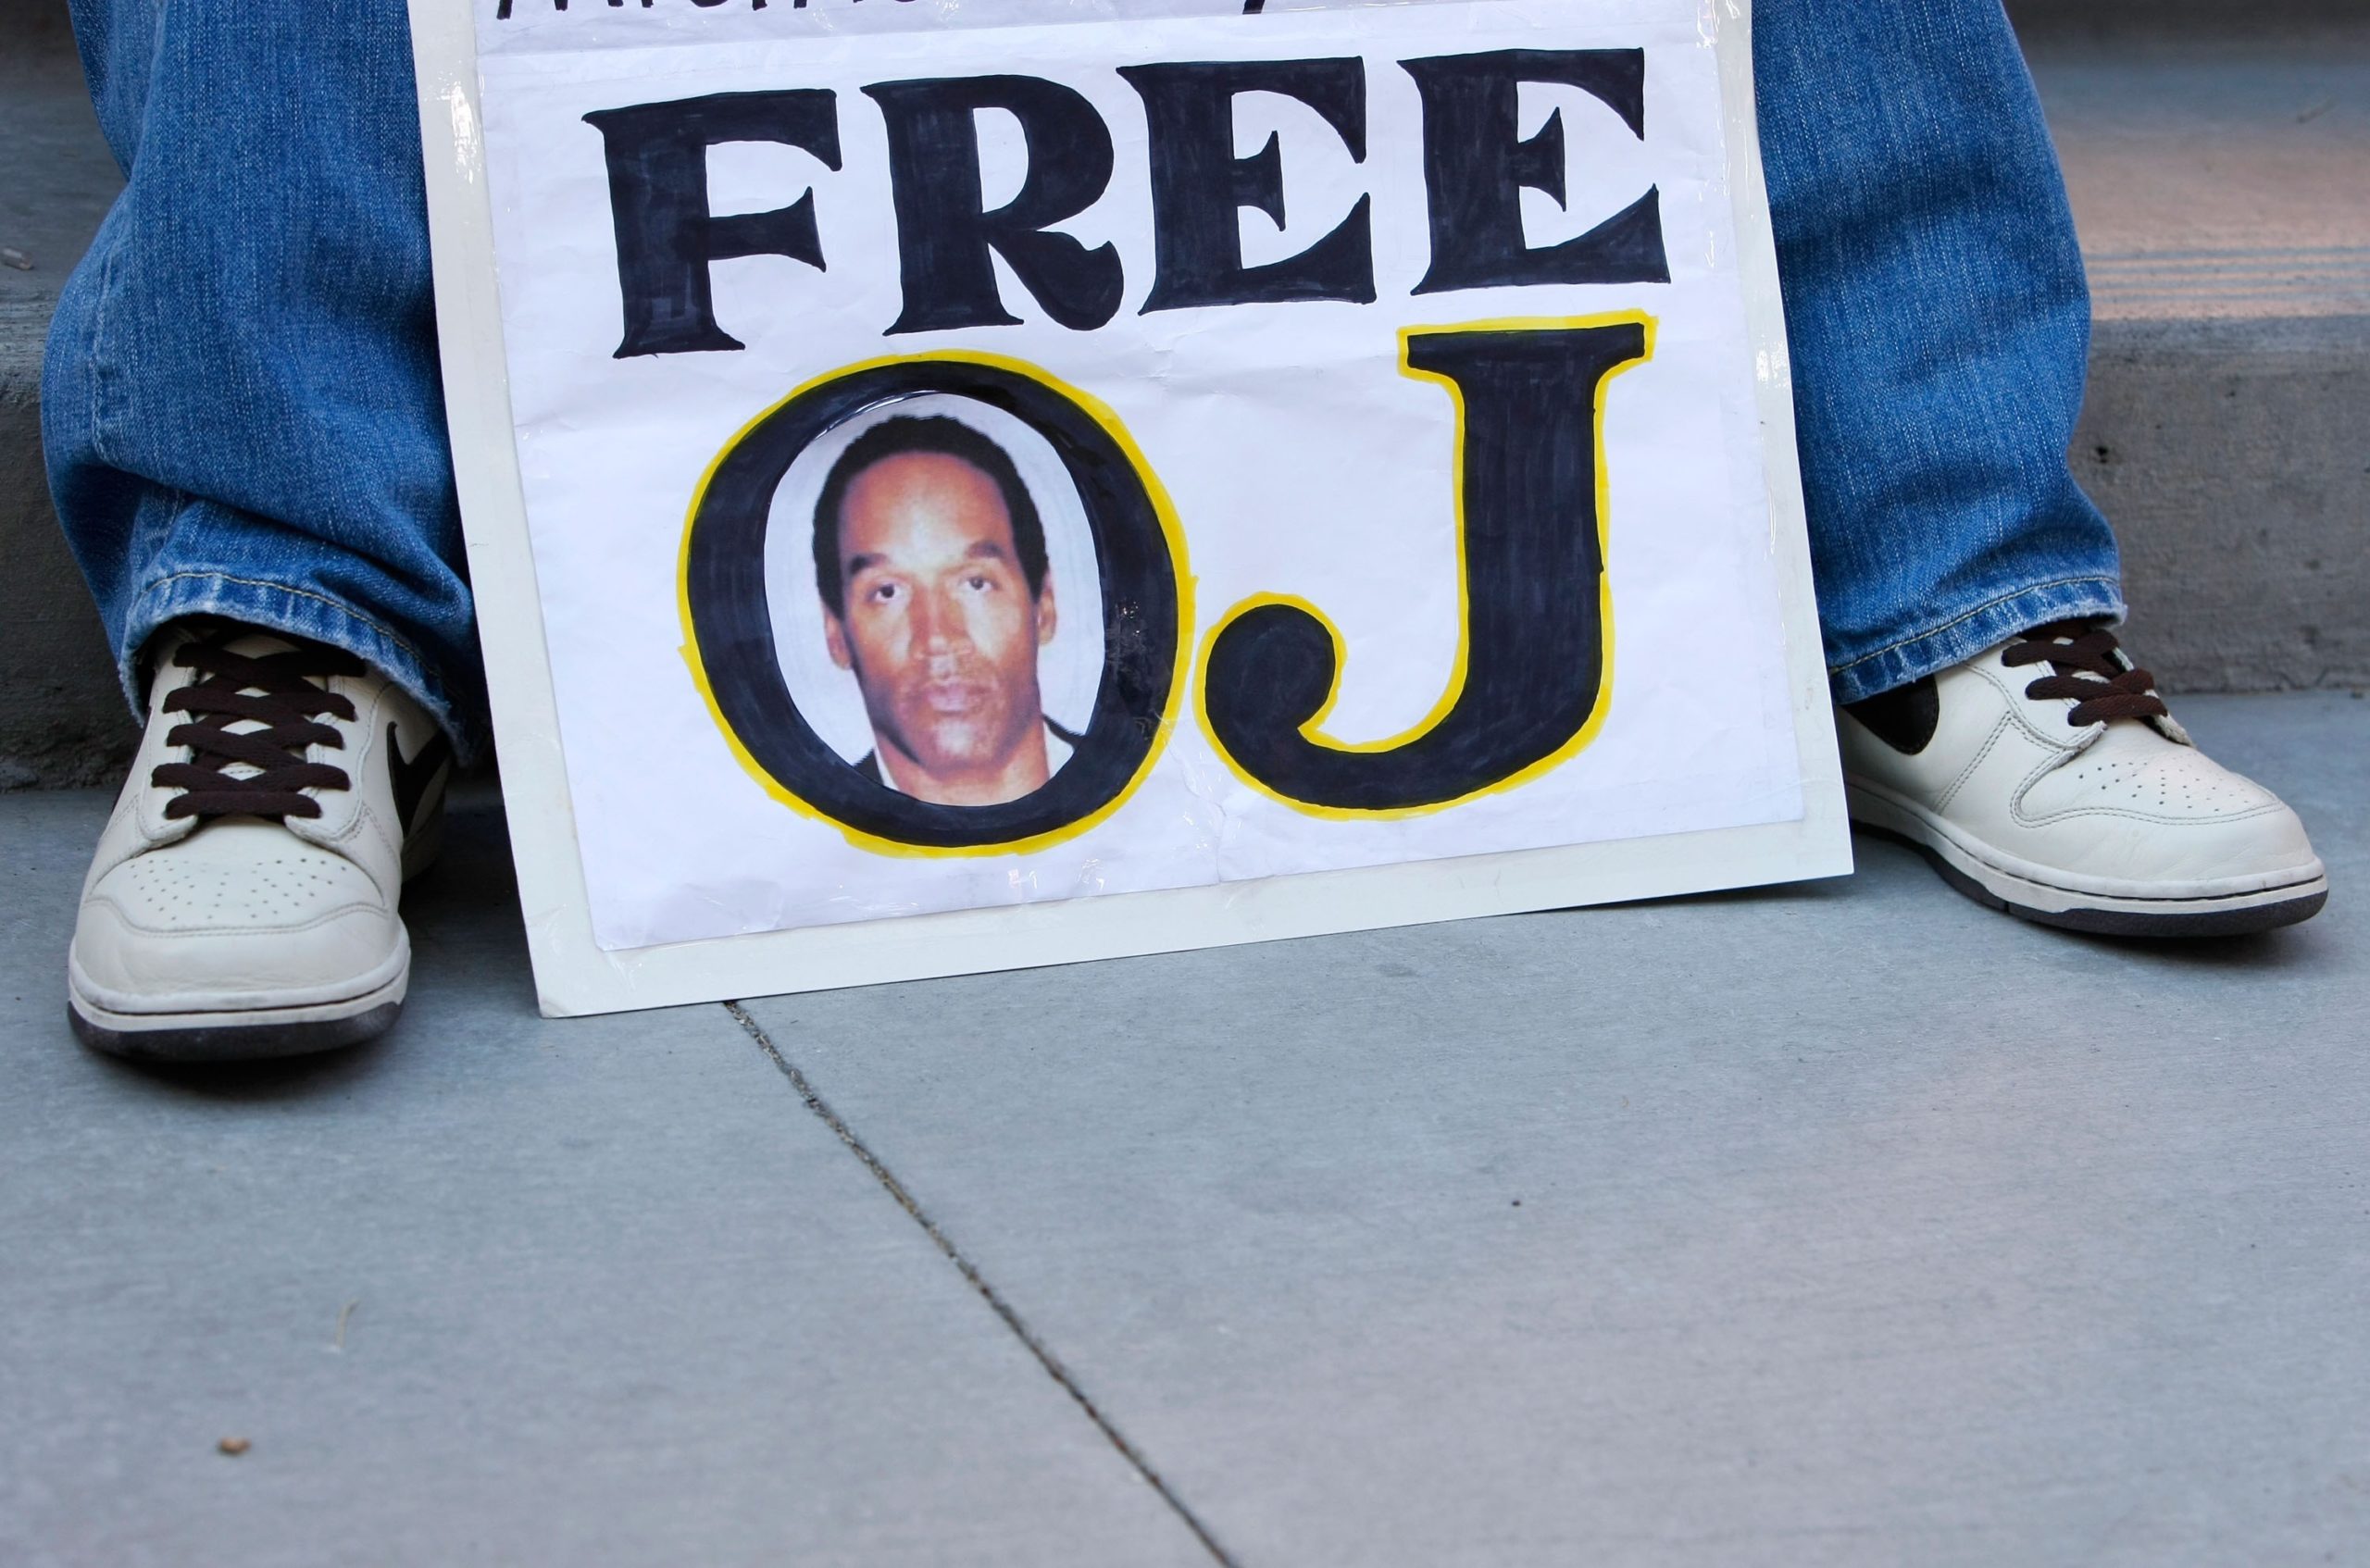 LAS VEGAS - SEPTEMBER 19: A person holds a sign outside the Clark County Regional Justice Center in support of football hall of famer O.J. Simpson September 19, 2007 in Las Vegas, Nevada. Simpson will be released today on a $125,000 bond on charges that include burglary, robbery, kidnapping and assault following an attempted robbery at a Las Vegas hotel last week. Justin Sullivan/Getty Images)